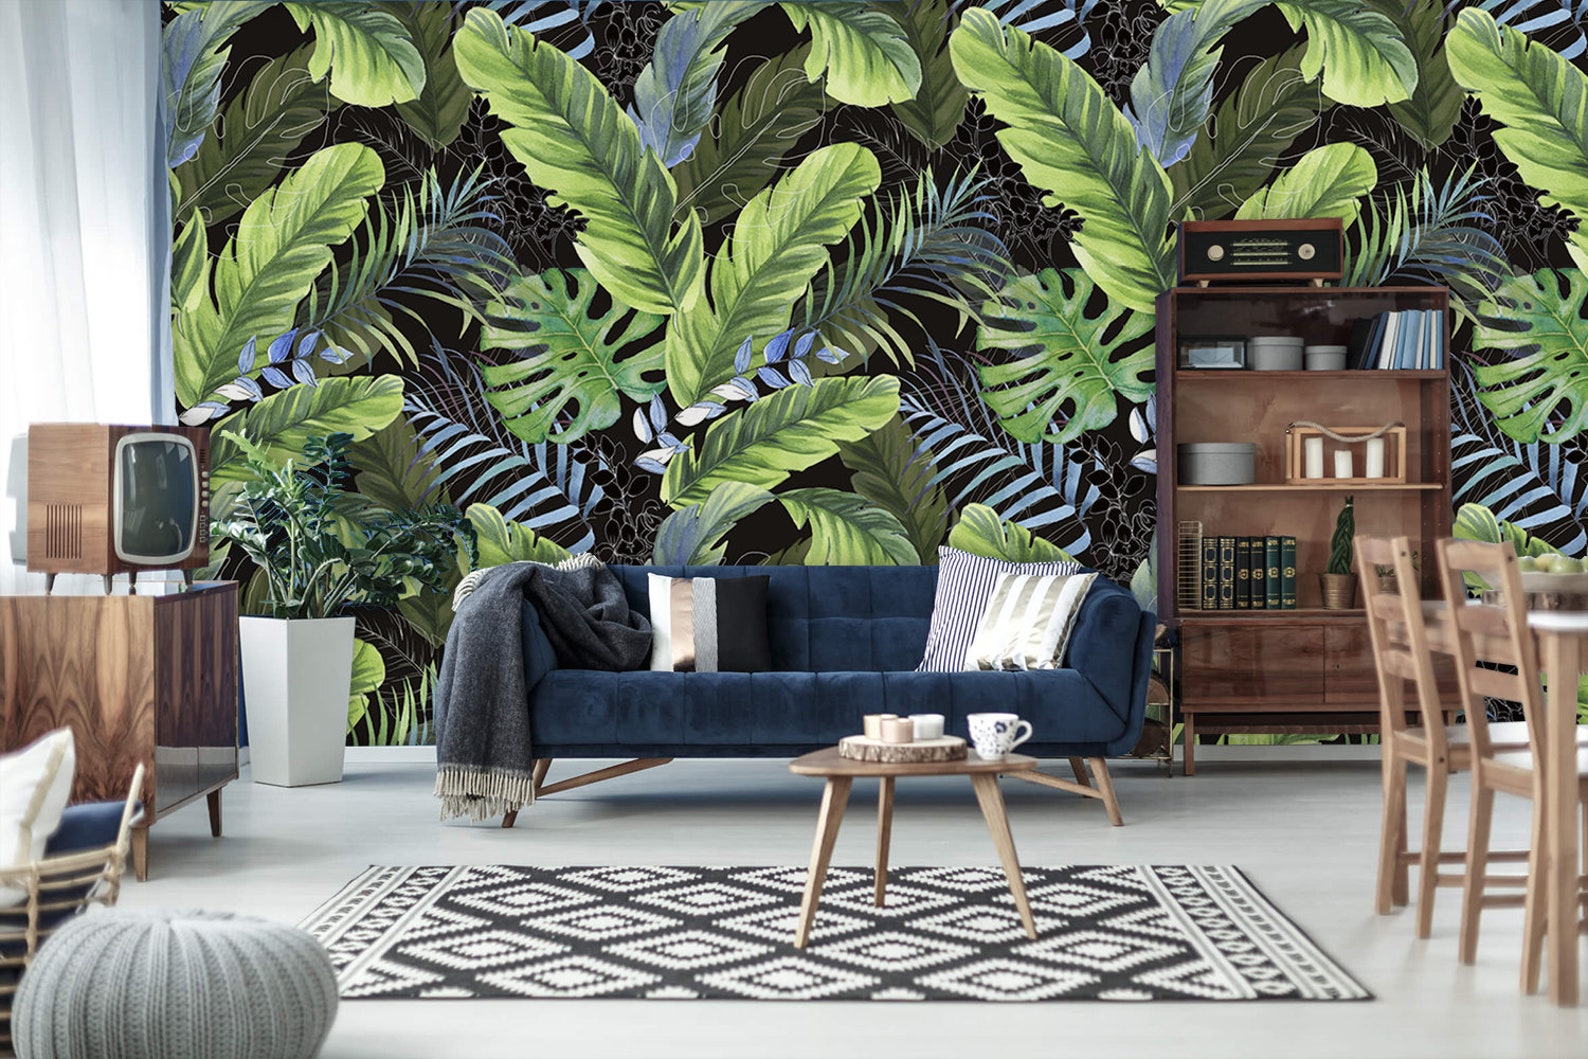 Monstera Leavesprint Painting Wallpaperlwall Decalremovable | Etsy